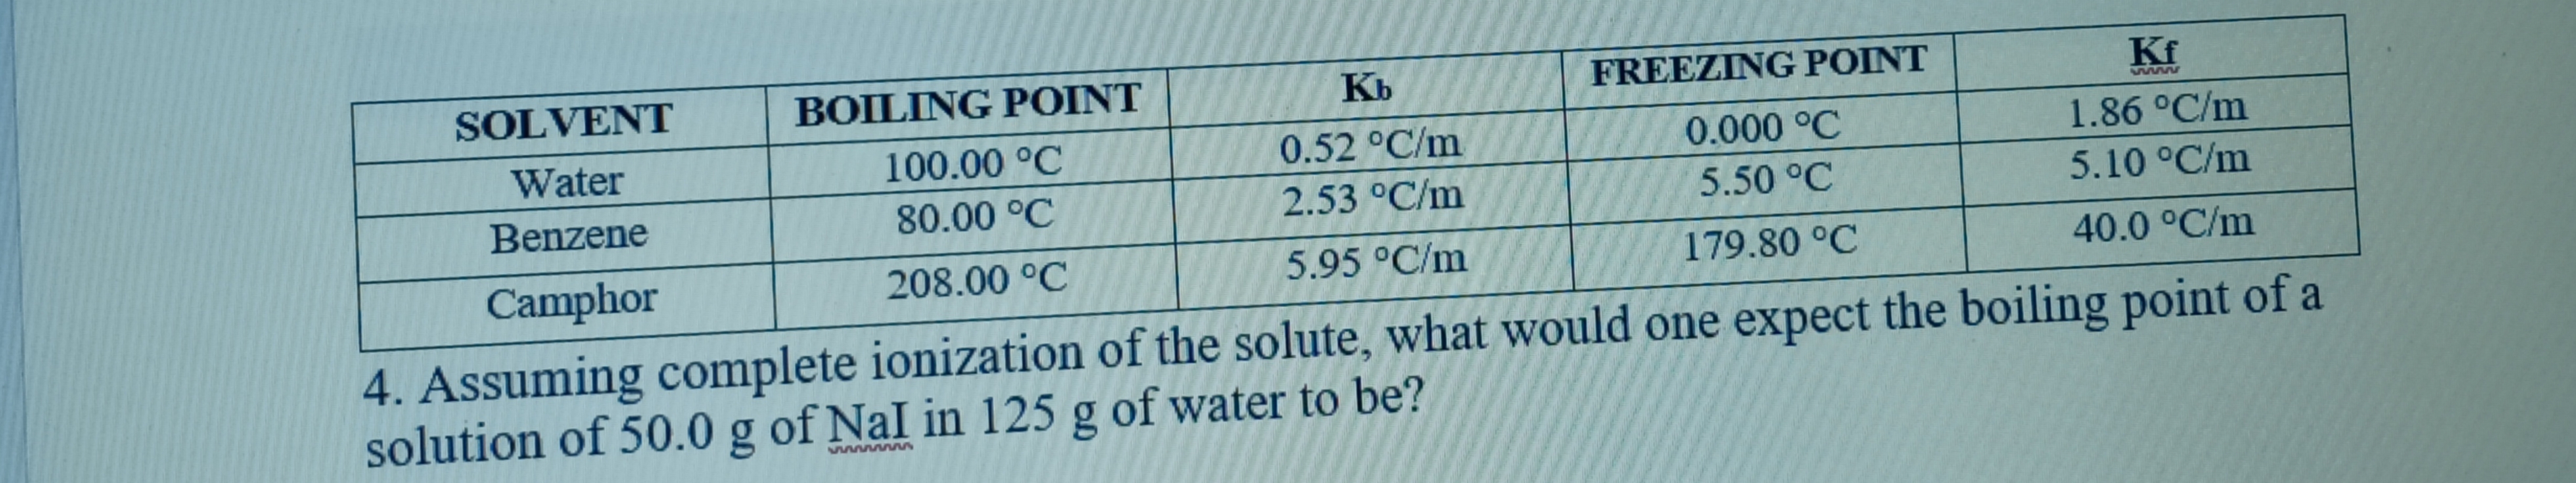 SOLVENT
BOILING POINT
Kb
FREEZING POINT
Kf
Water
100.00 °C
0.52 °C/m
0.000 °C
1.86 °C/m
Benzene
80.00 °C
2.53 °C/m
5.50 °C
5.10 °C/m
Camphor
208.00 °C
5.95 °C/m
179.80 °C
40.0 °C/m
4. Assuming complete ionization of the solute, what would one expect the boiling point of a
solution of 50.0 g of Nal in 125 g of water to be?
